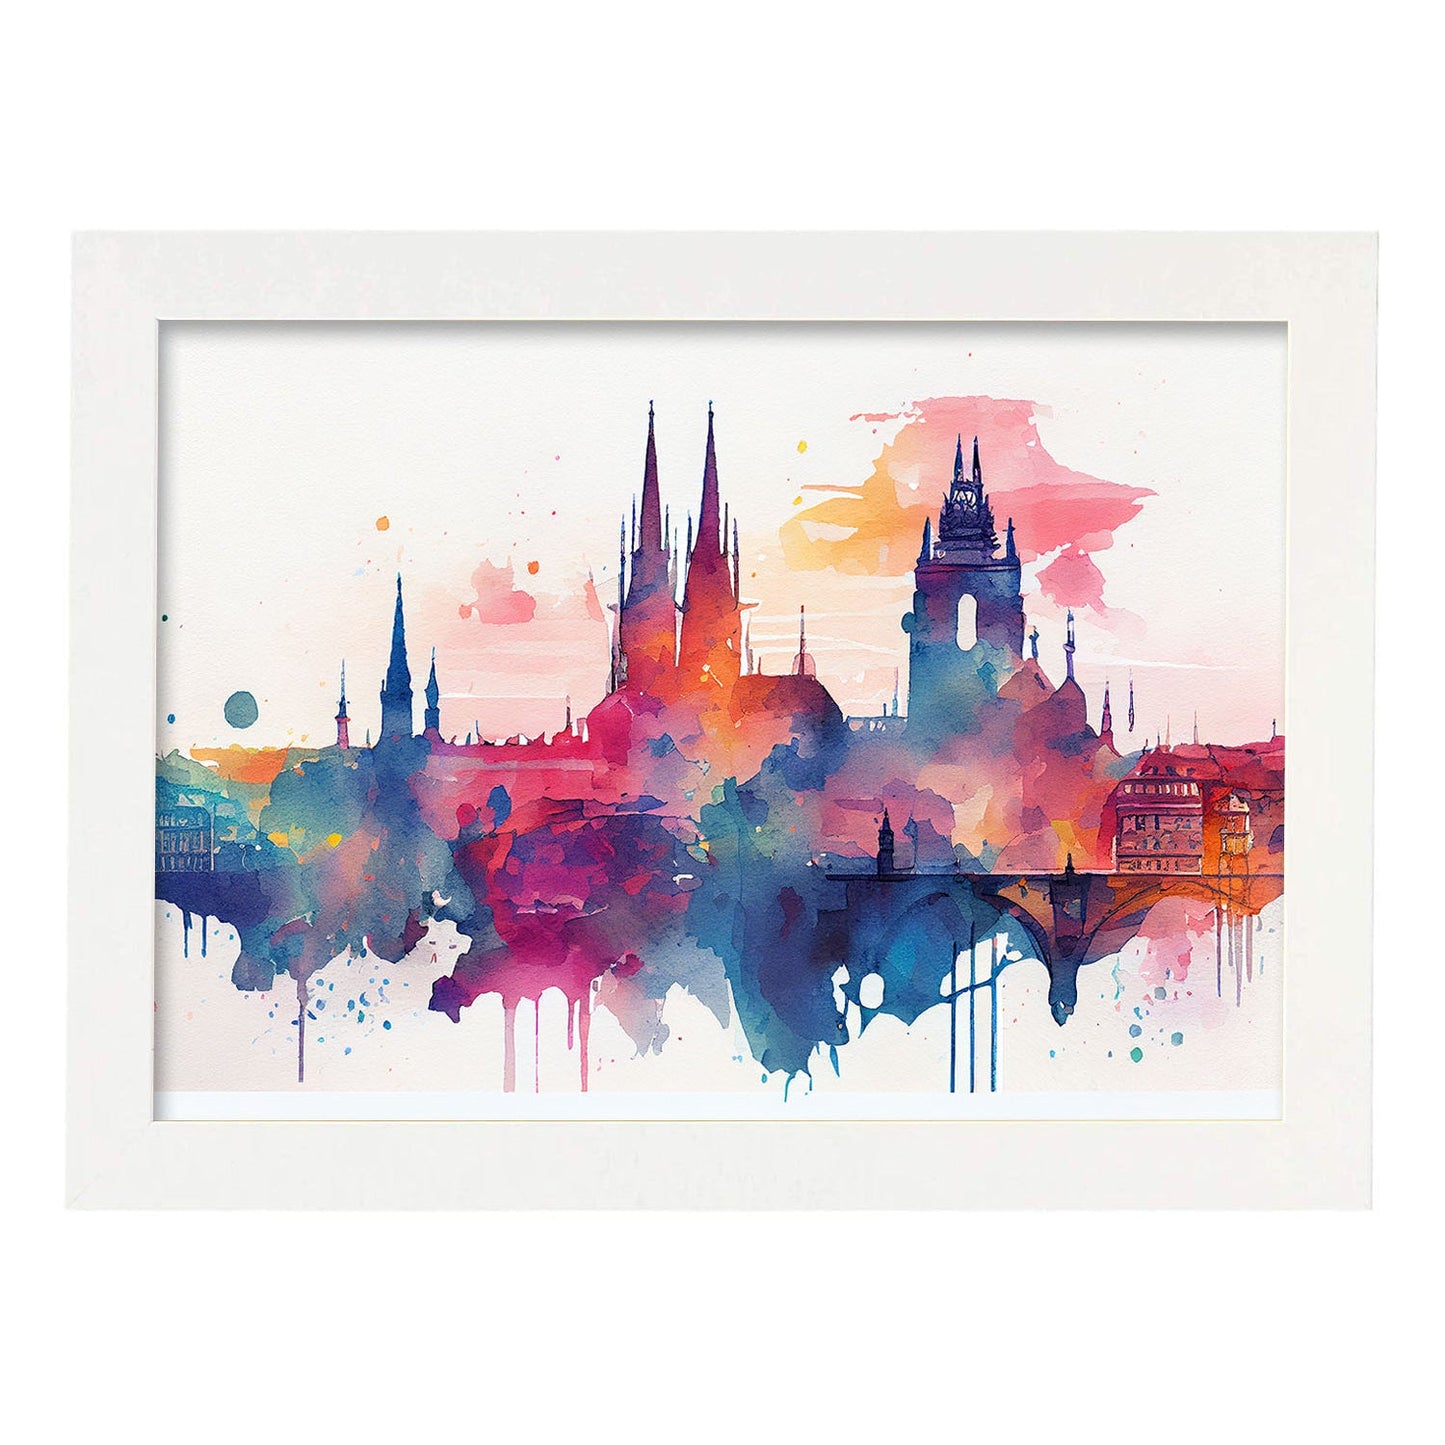 Nacnic watercolor of a skyline of the city of Prague_1. Aesthetic Wall Art Prints for Bedroom or Living Room Design.-Artwork-Nacnic-A4-Marco Blanco-Nacnic Estudio SL